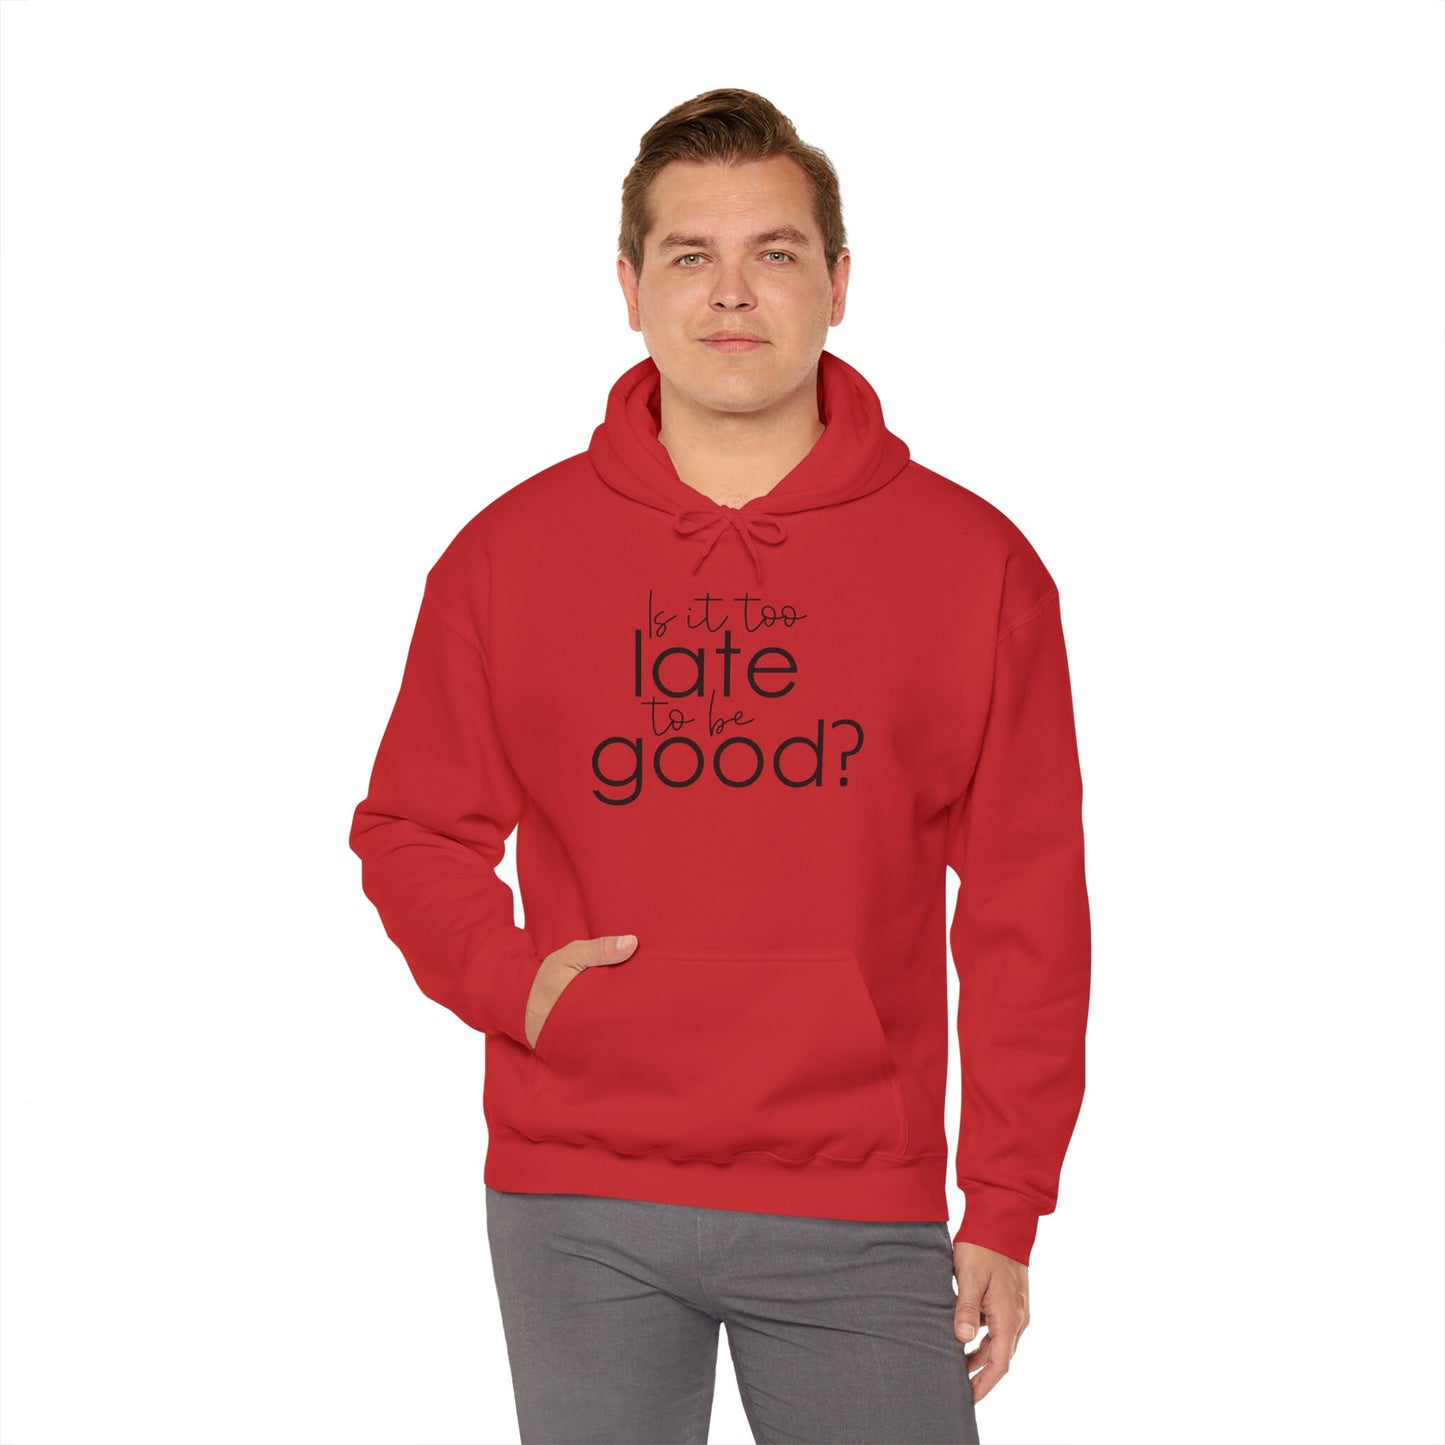 Is it too Late to be Good? - Funny Christmas - Unisex Heavy Blend™ Hooded Sweatshirt